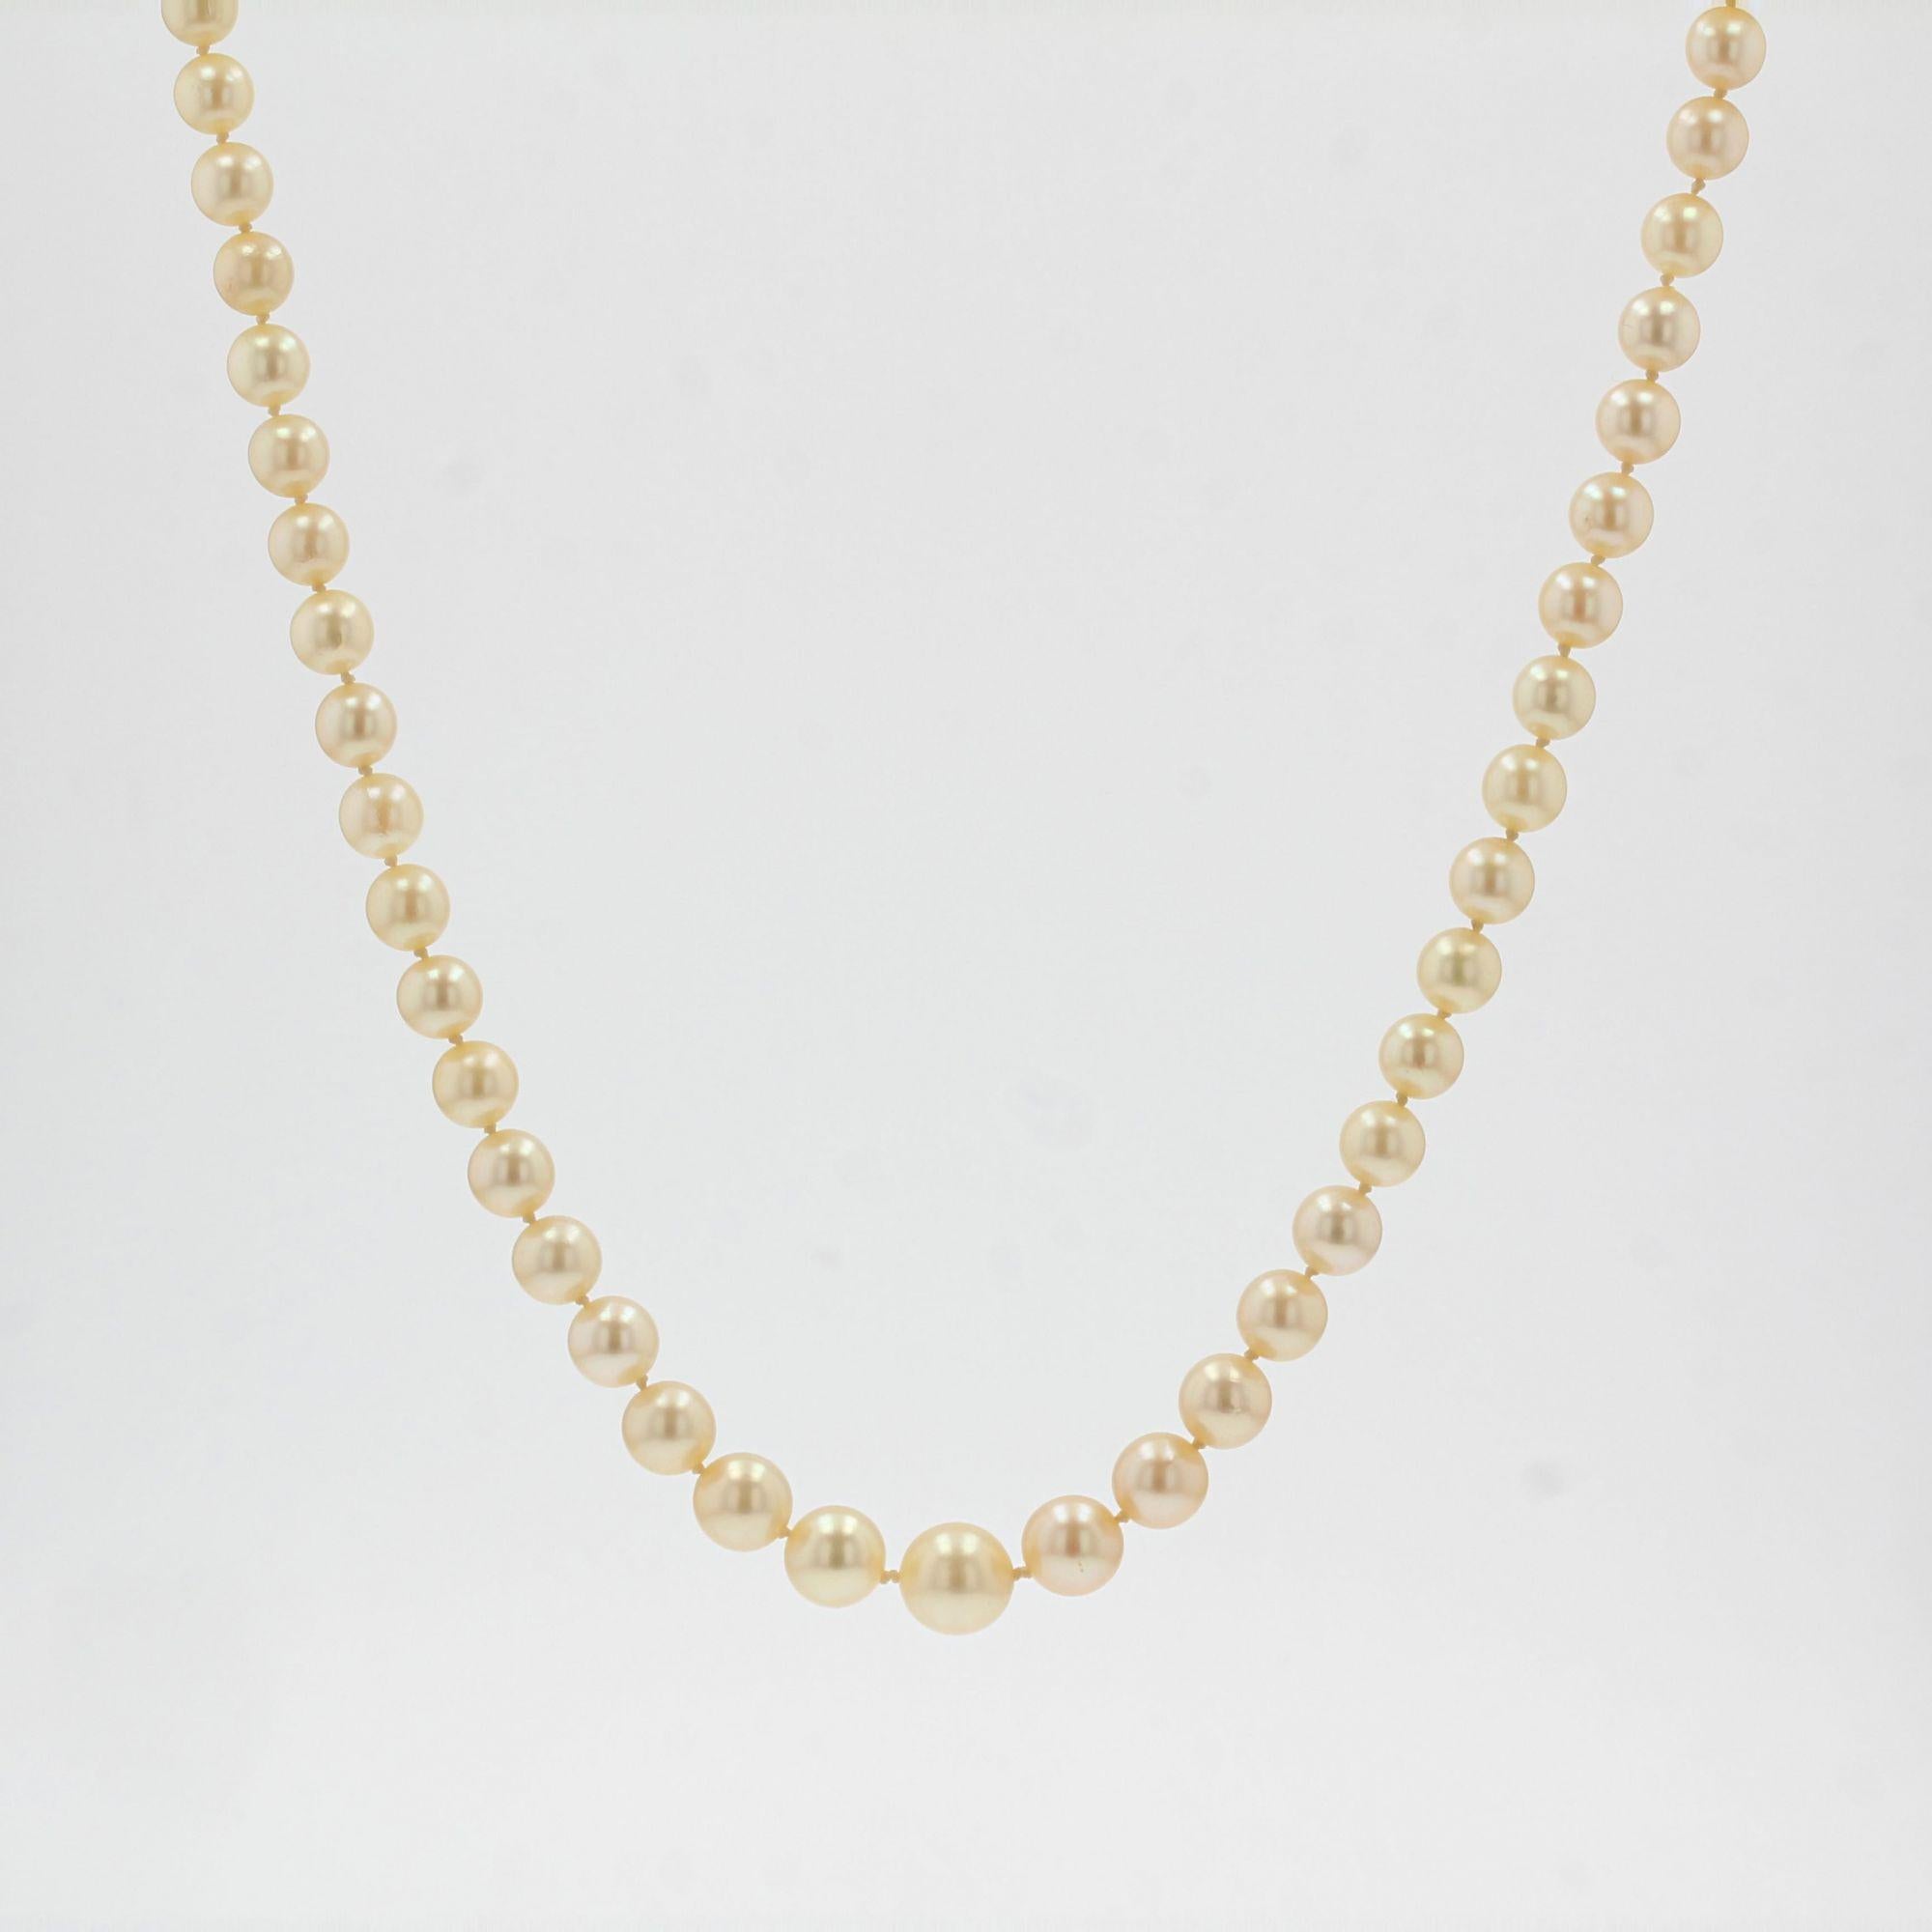 French 1950s Cultured Golden Falling Pearl Necklace For Sale 3